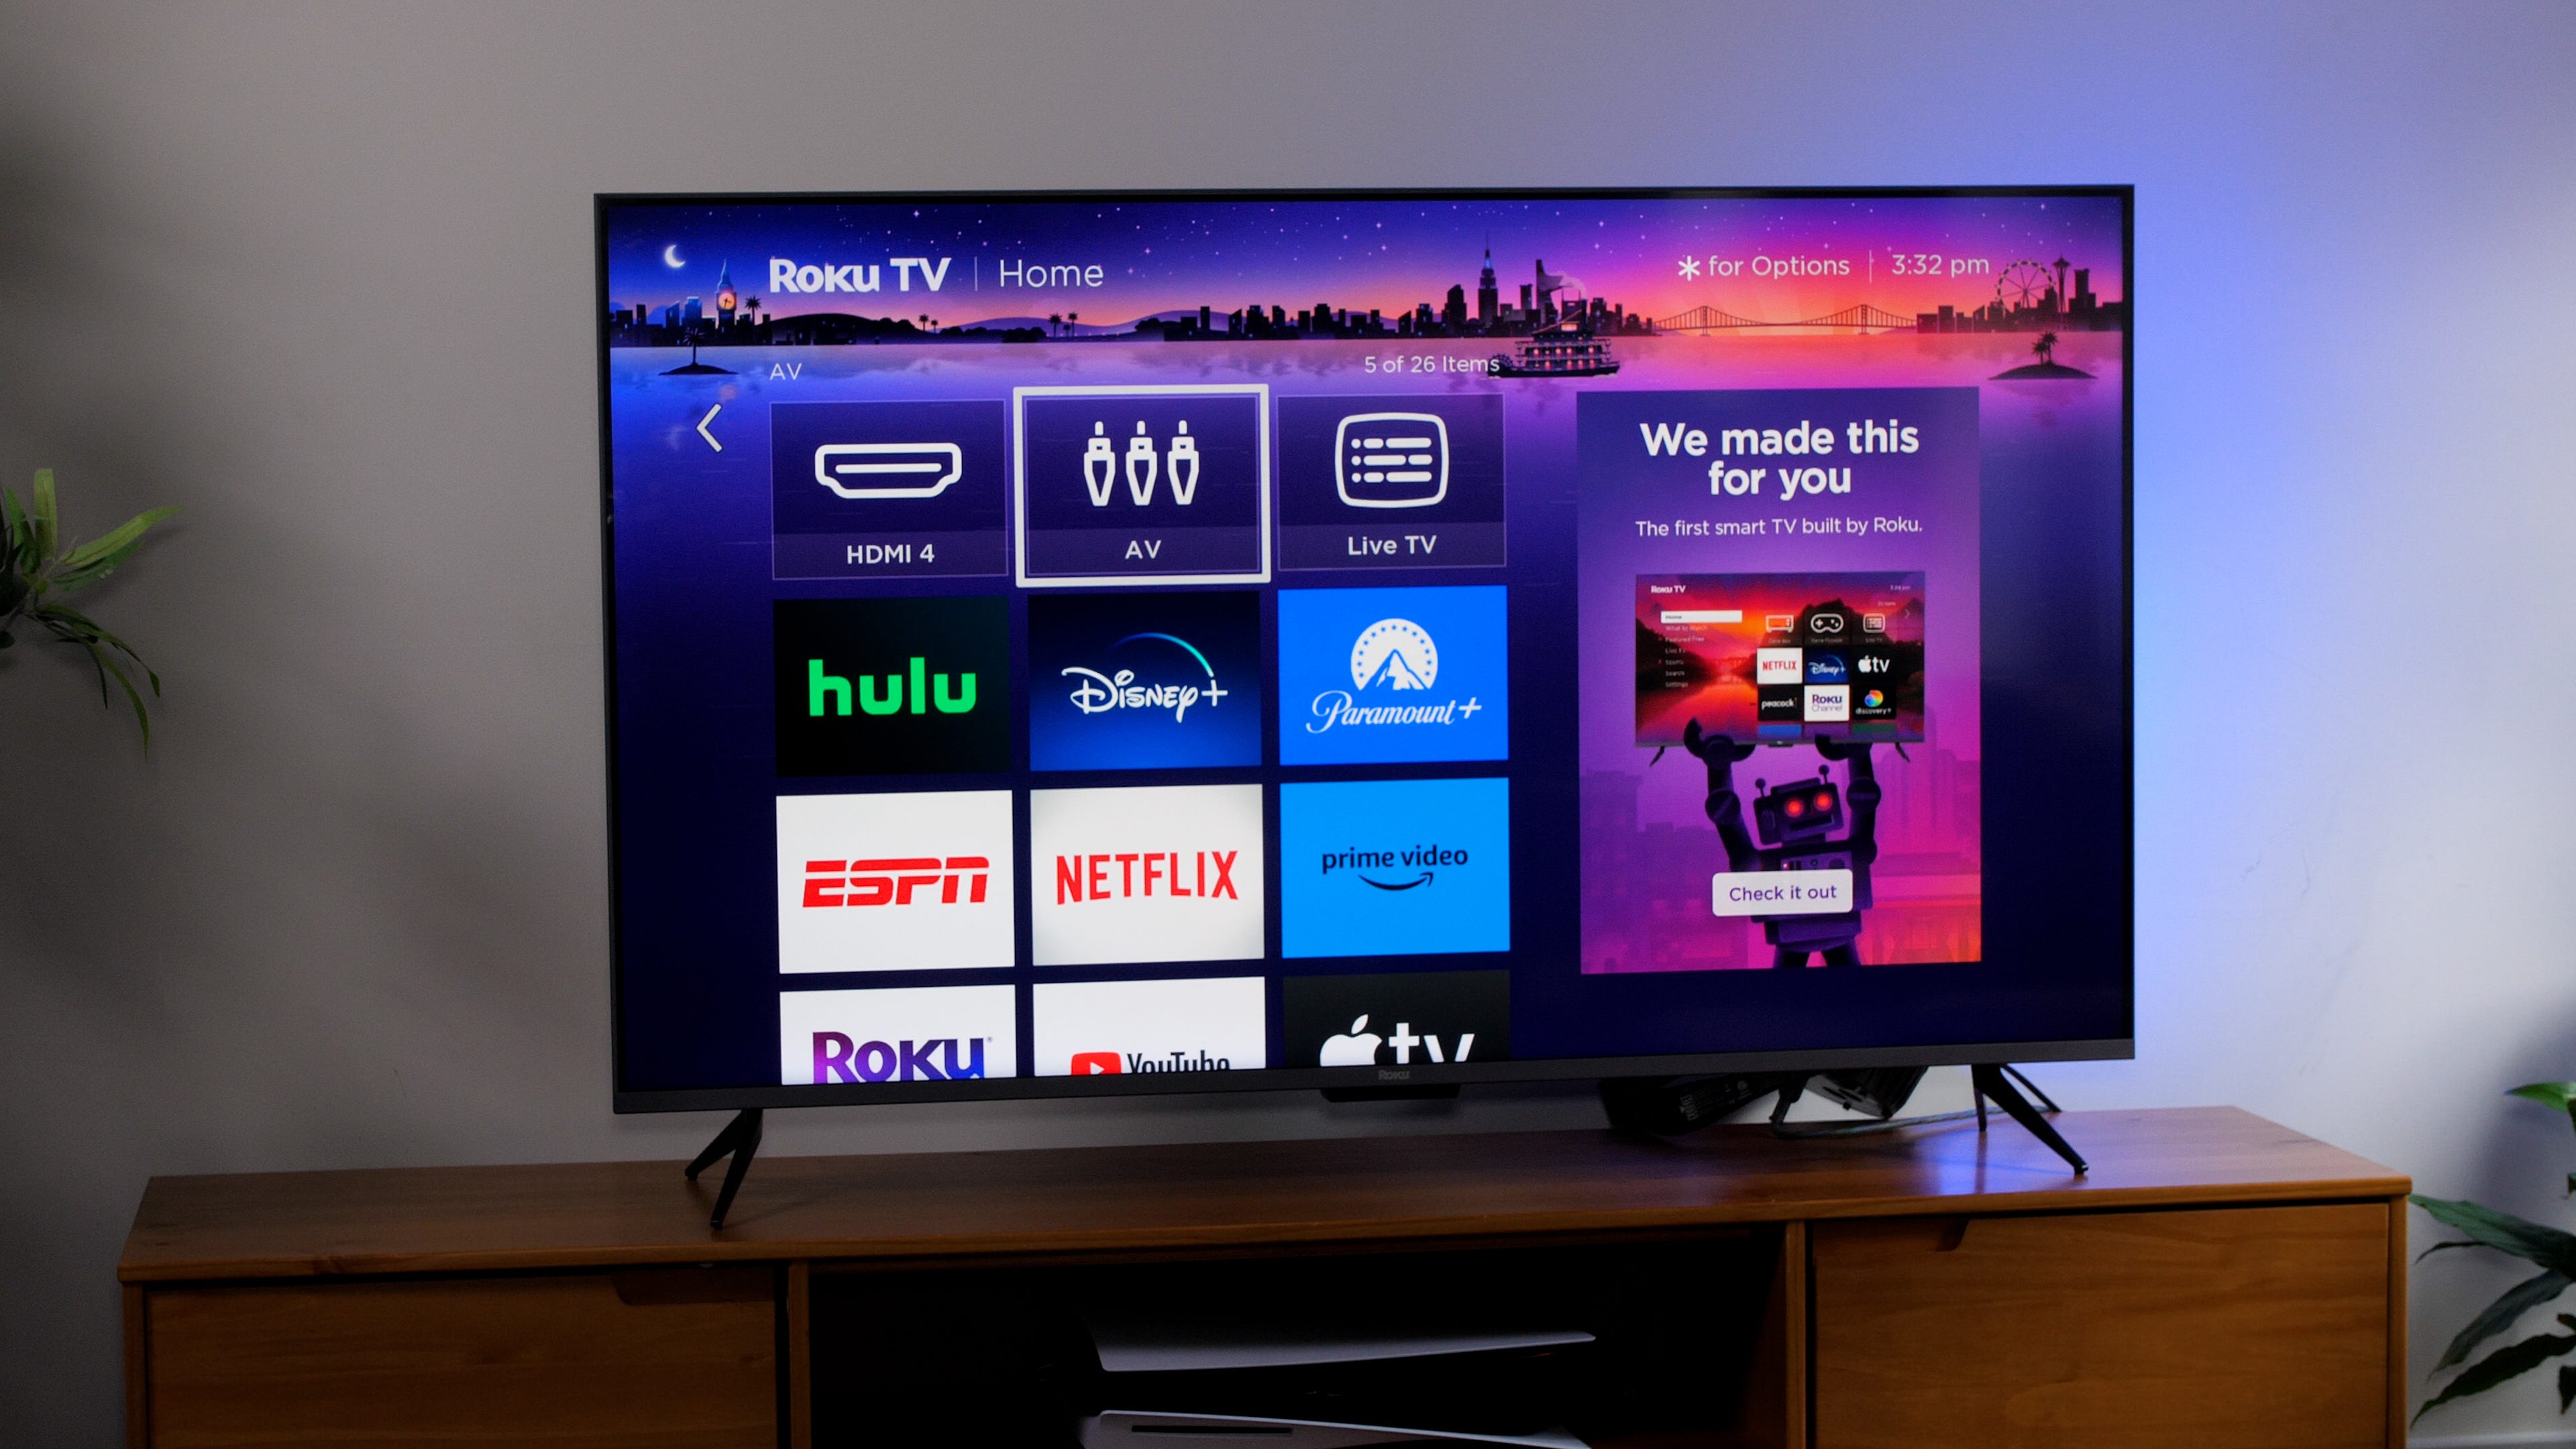 Sharp's Roku OLED TV is now available and deeply discounted